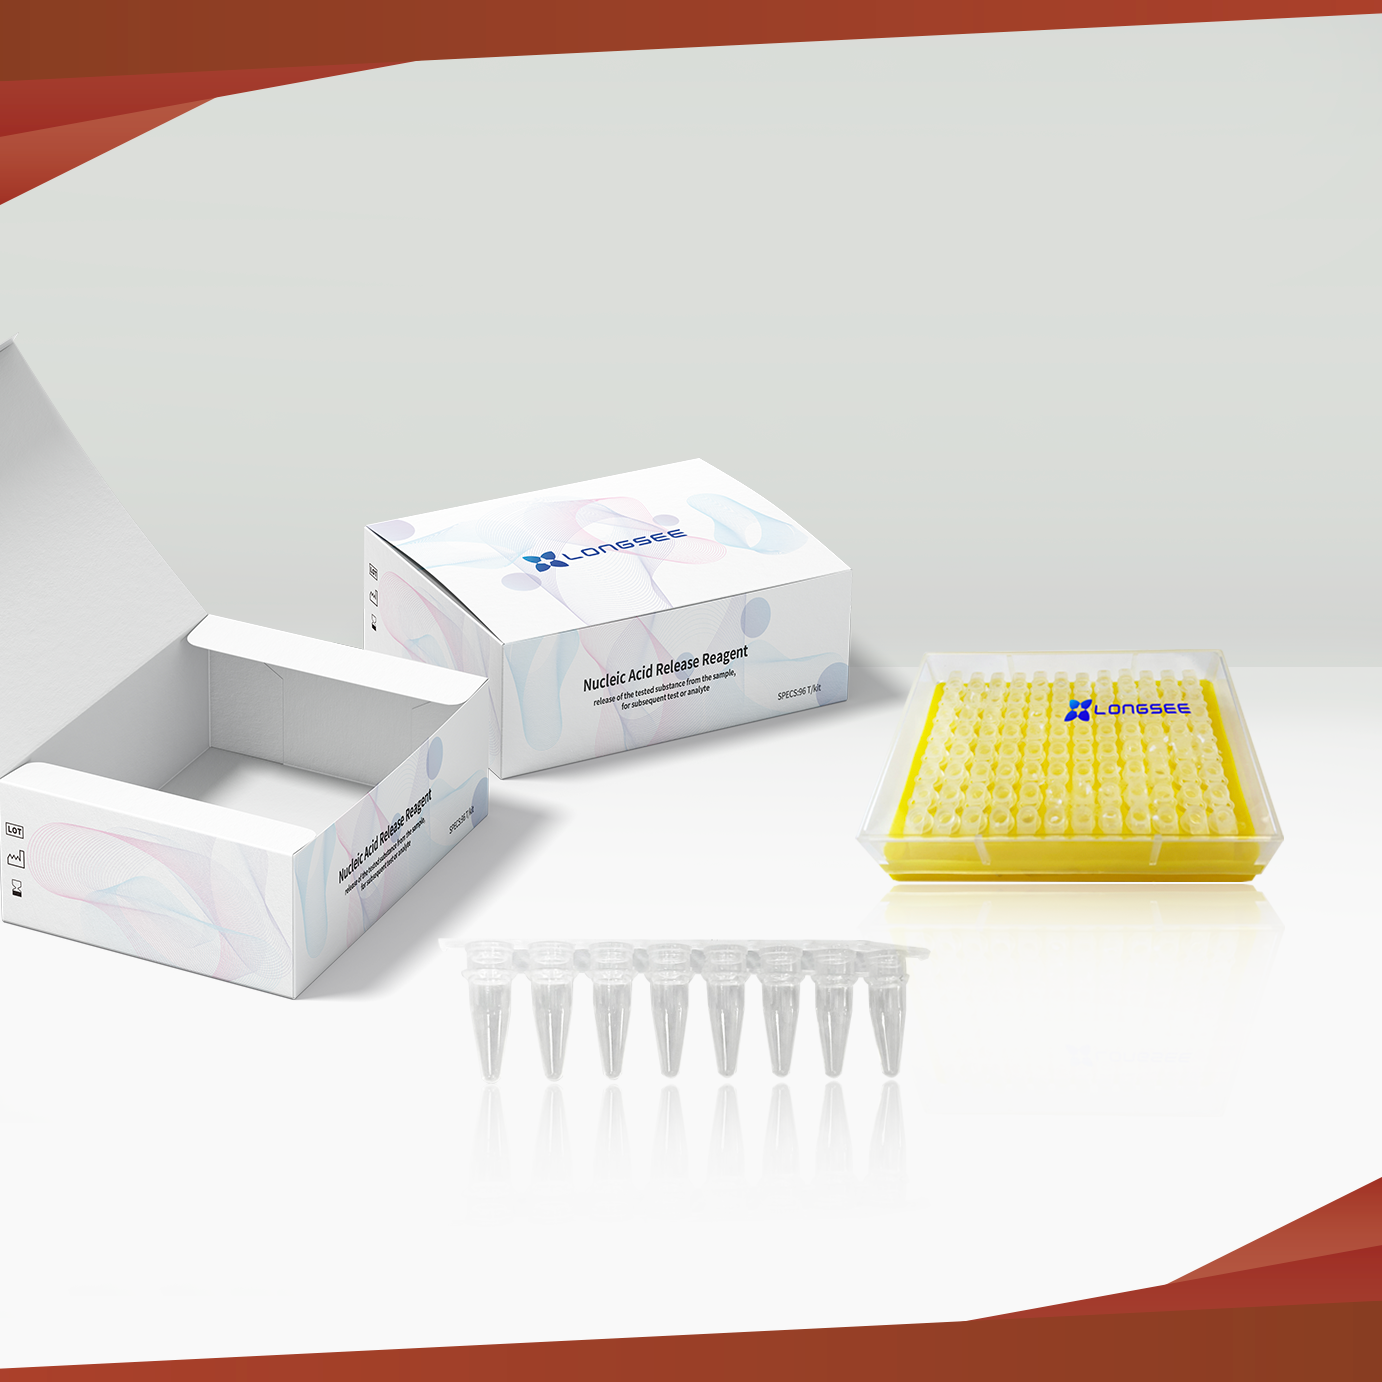 Nucleic Acid Release Reagent <br>（For Professional Use Only）